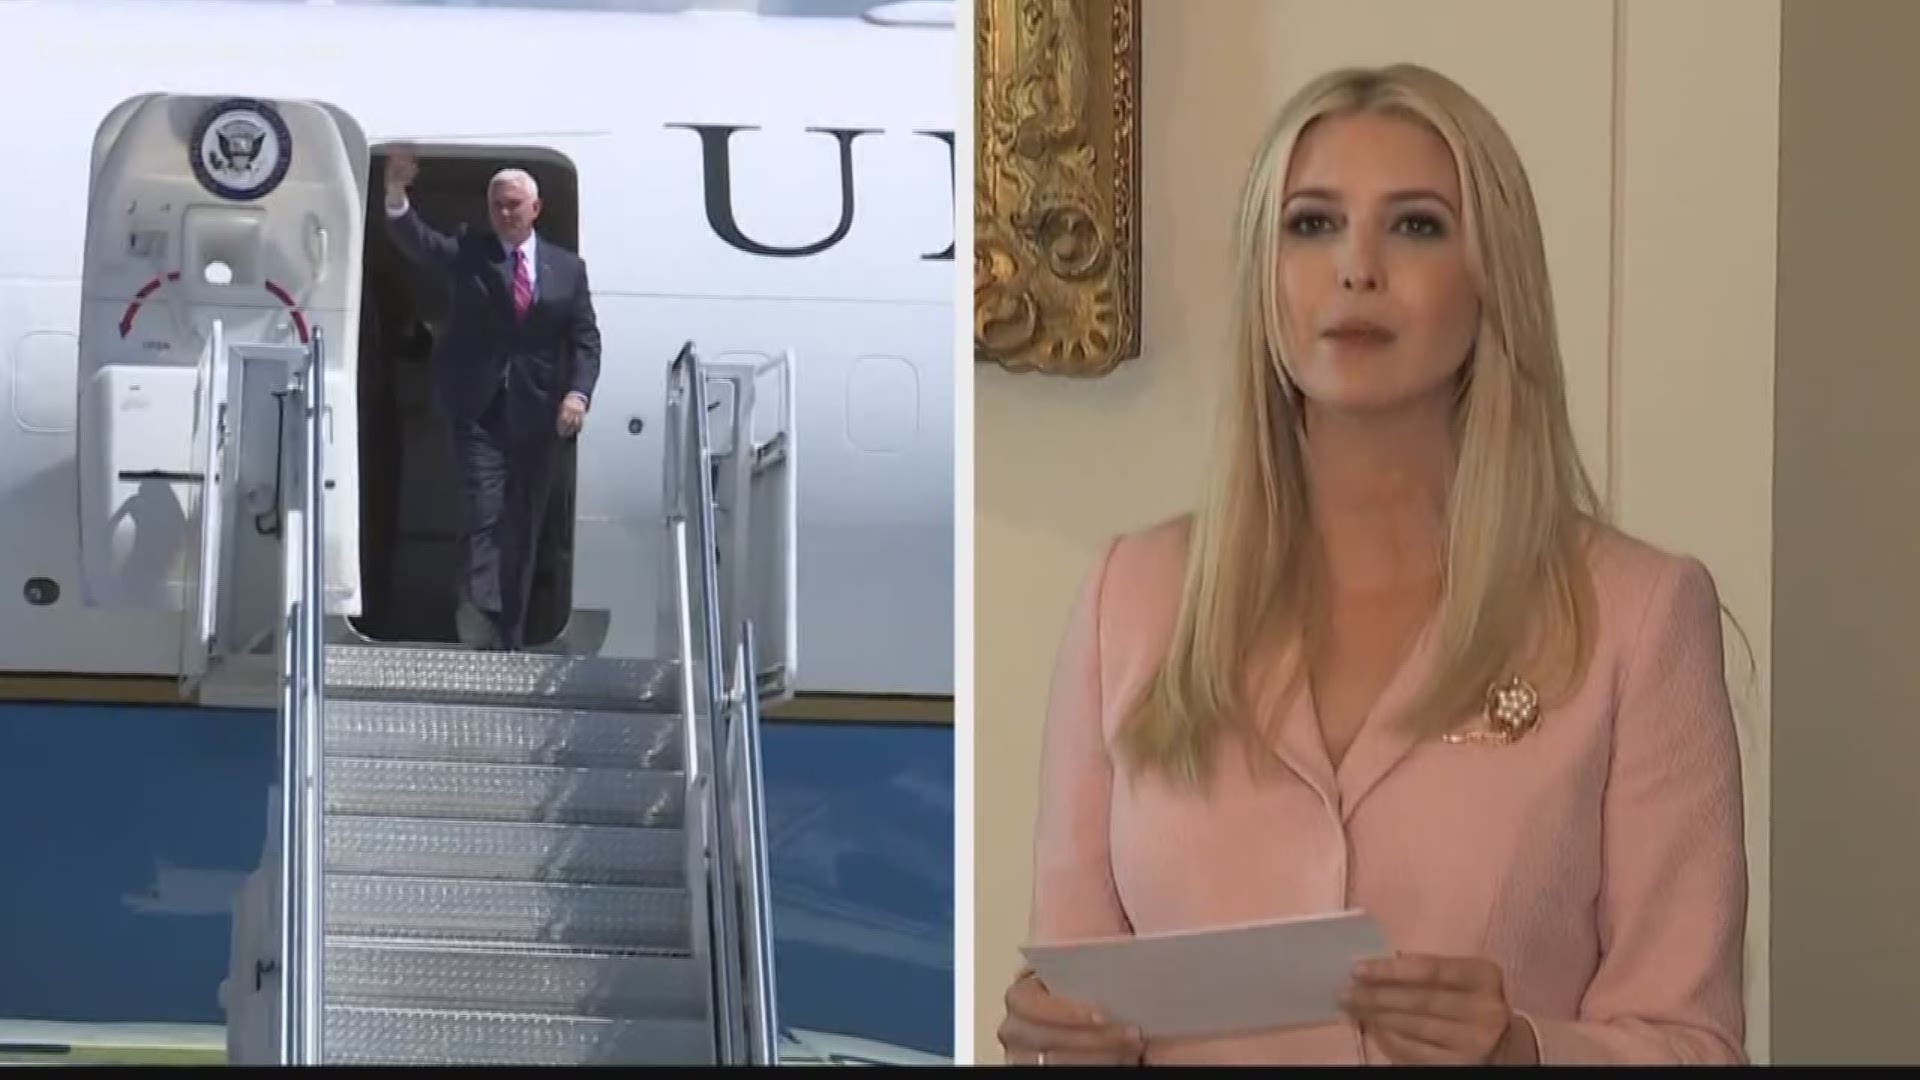 VP Pence and Ivanka Trump to visit the First Coast, Mayport change of command, Jaguars and much more!